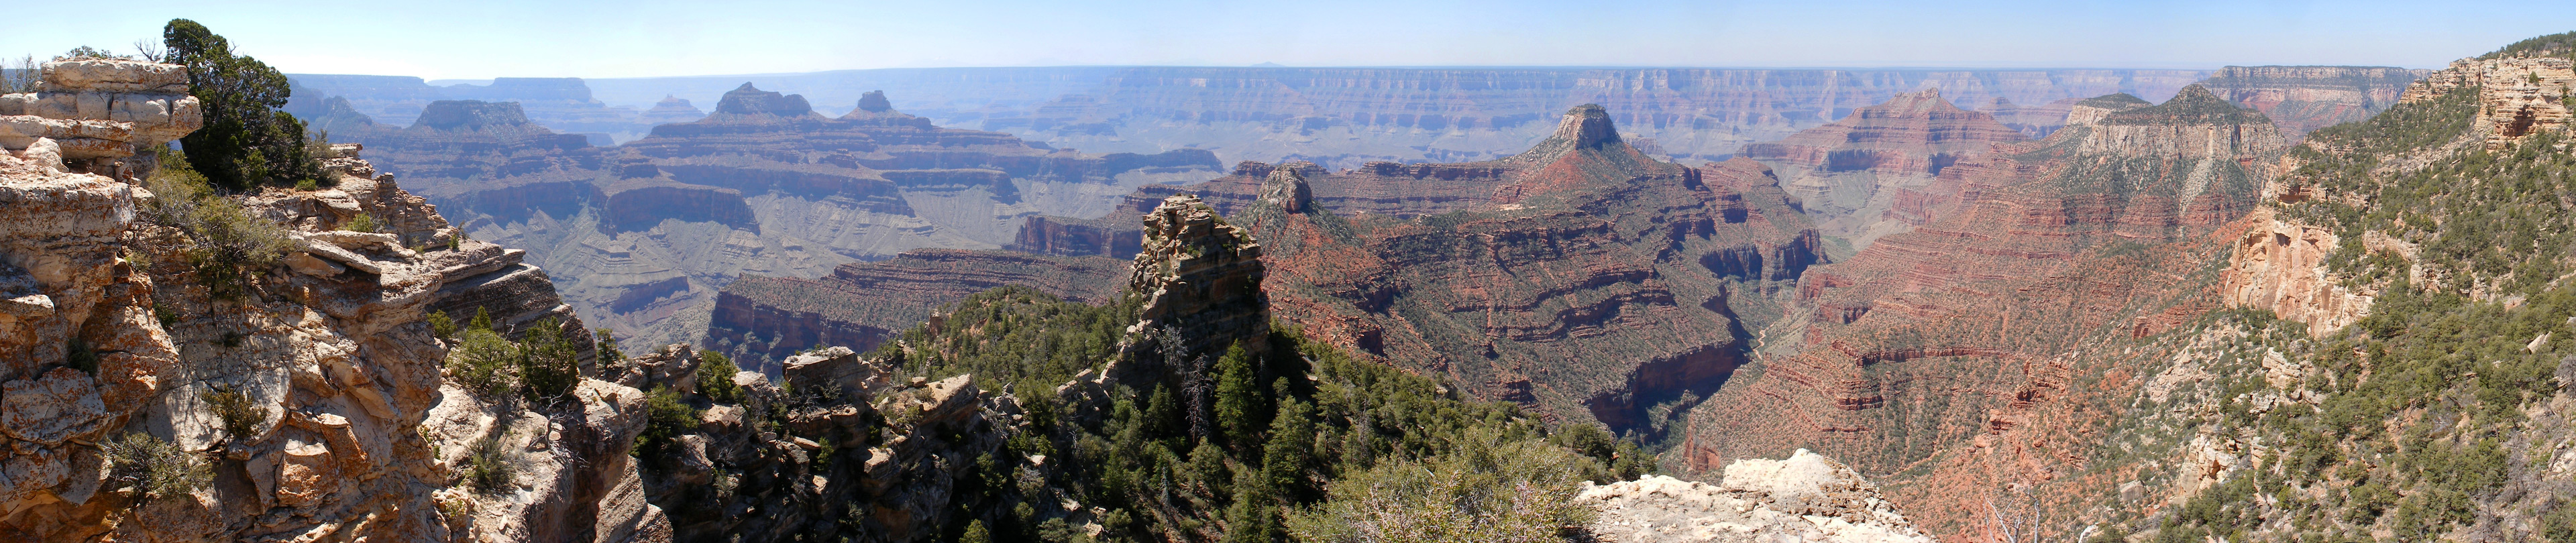 Panorama of the Grand Canyon, from Widforss Point